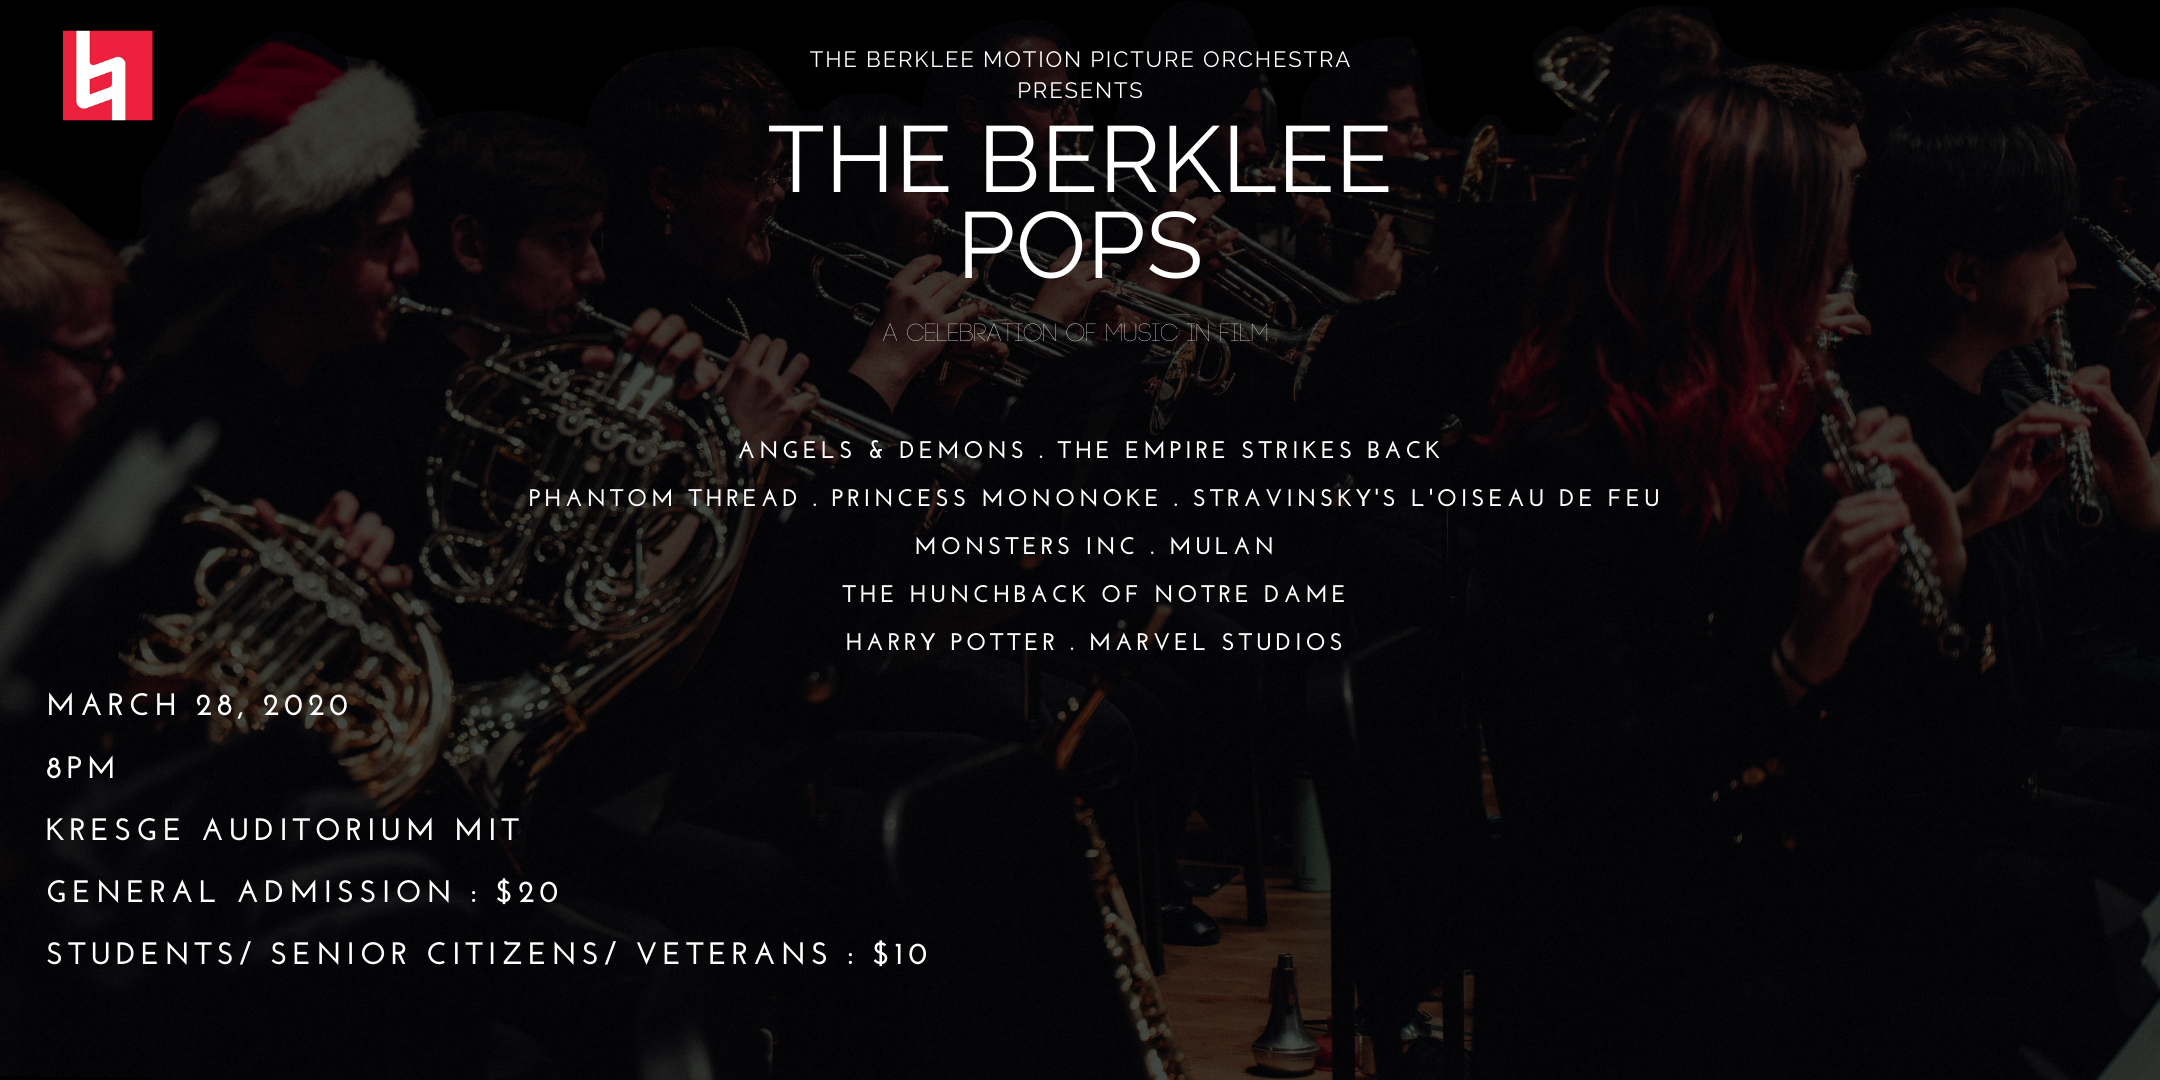 BMPO Presents THE BERKLEE POPS - A Celebration of Music in Film